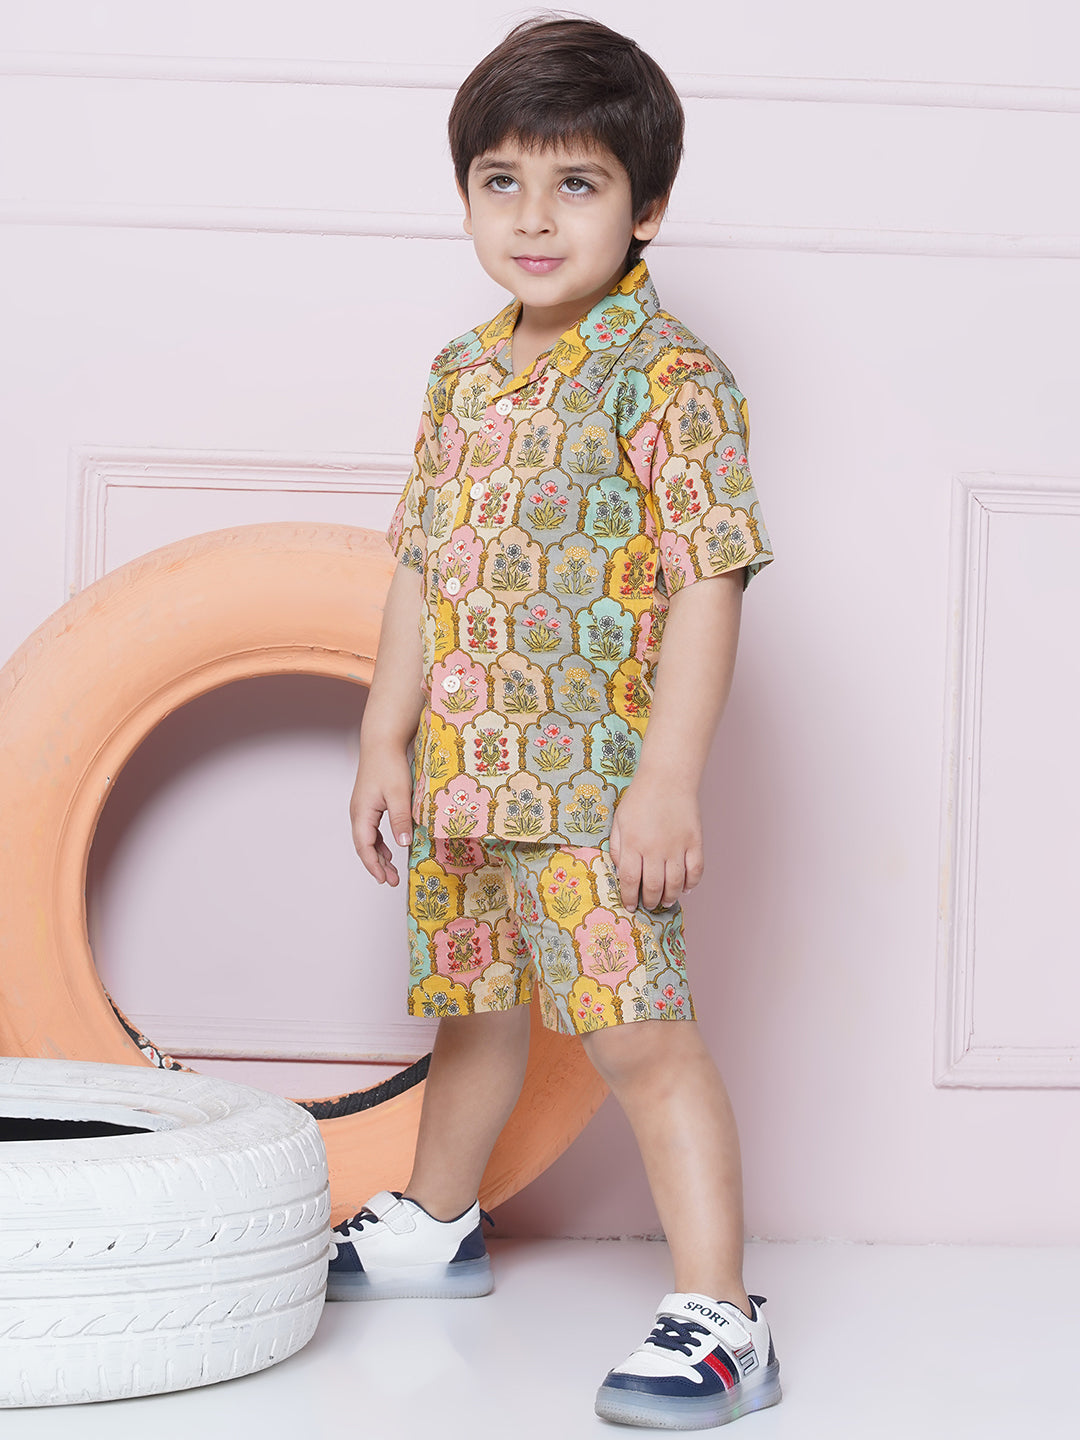 Beige Cotton Shirt & shorts Half Sleeves with Collar and Floral CO-ORDS Set for Boys